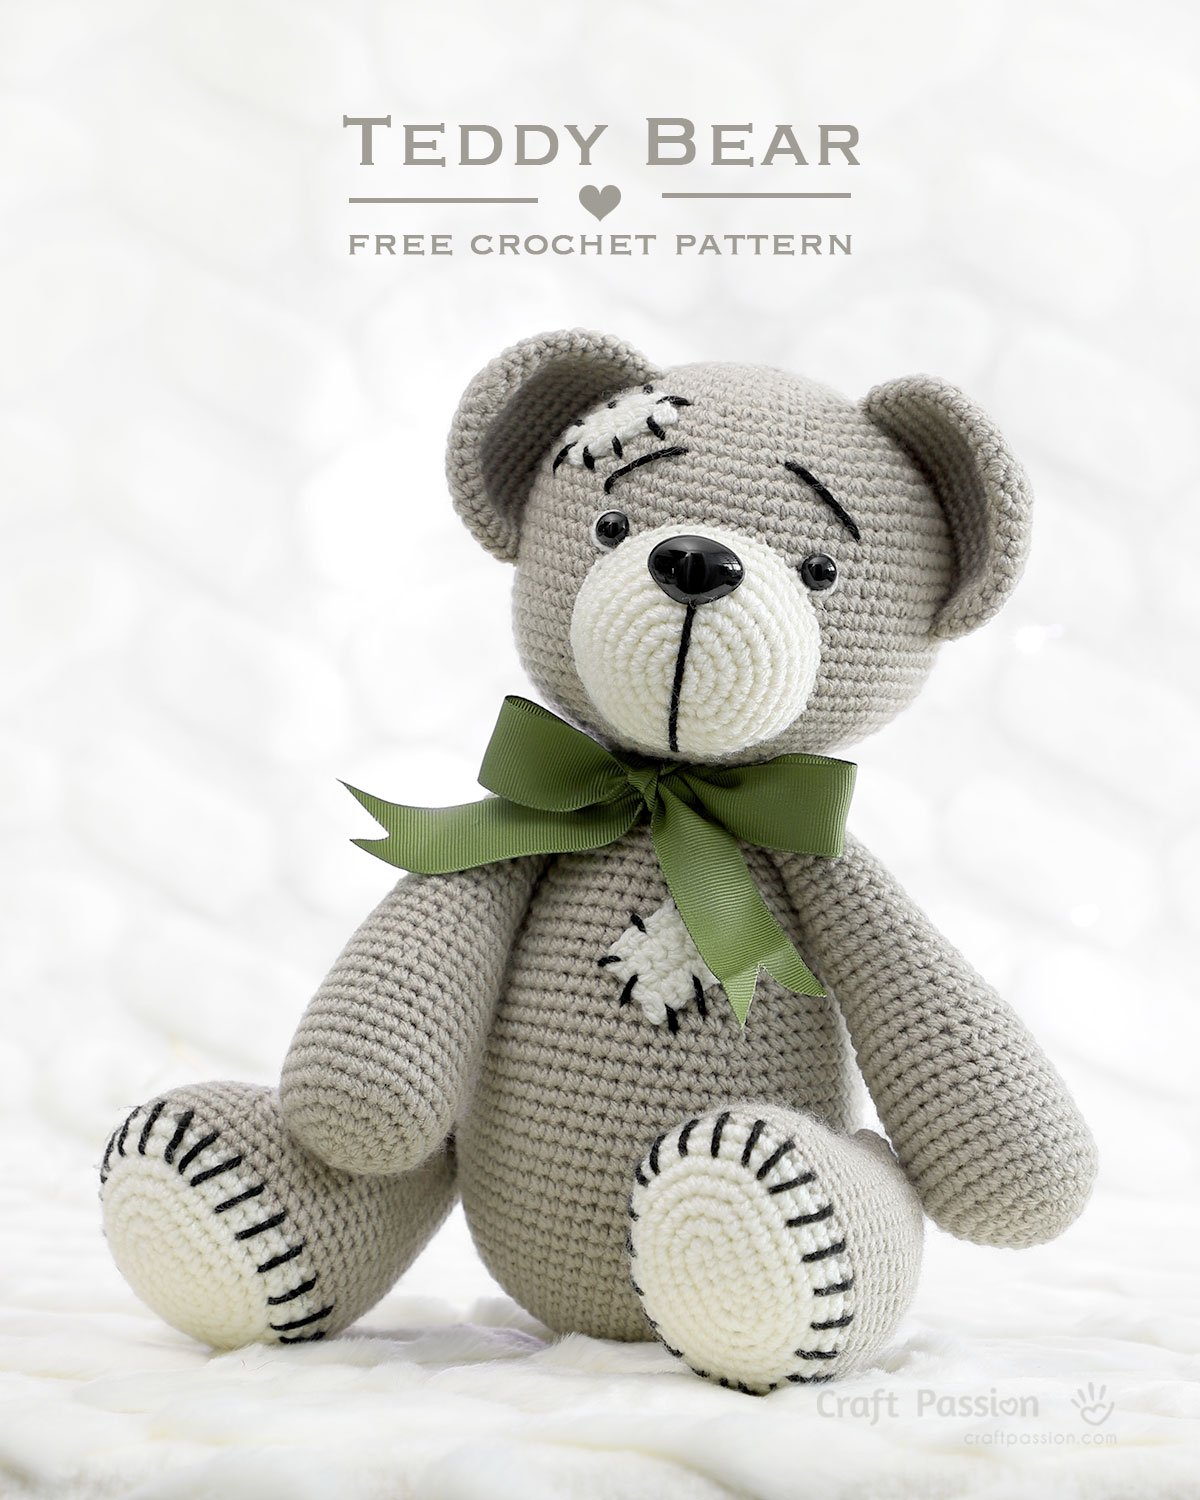 Get a free crochet teddy bear pattern with step-by-step instructions. Perfect for making the cuddly teddy bear friend, Tad, that every little kid wishes for.